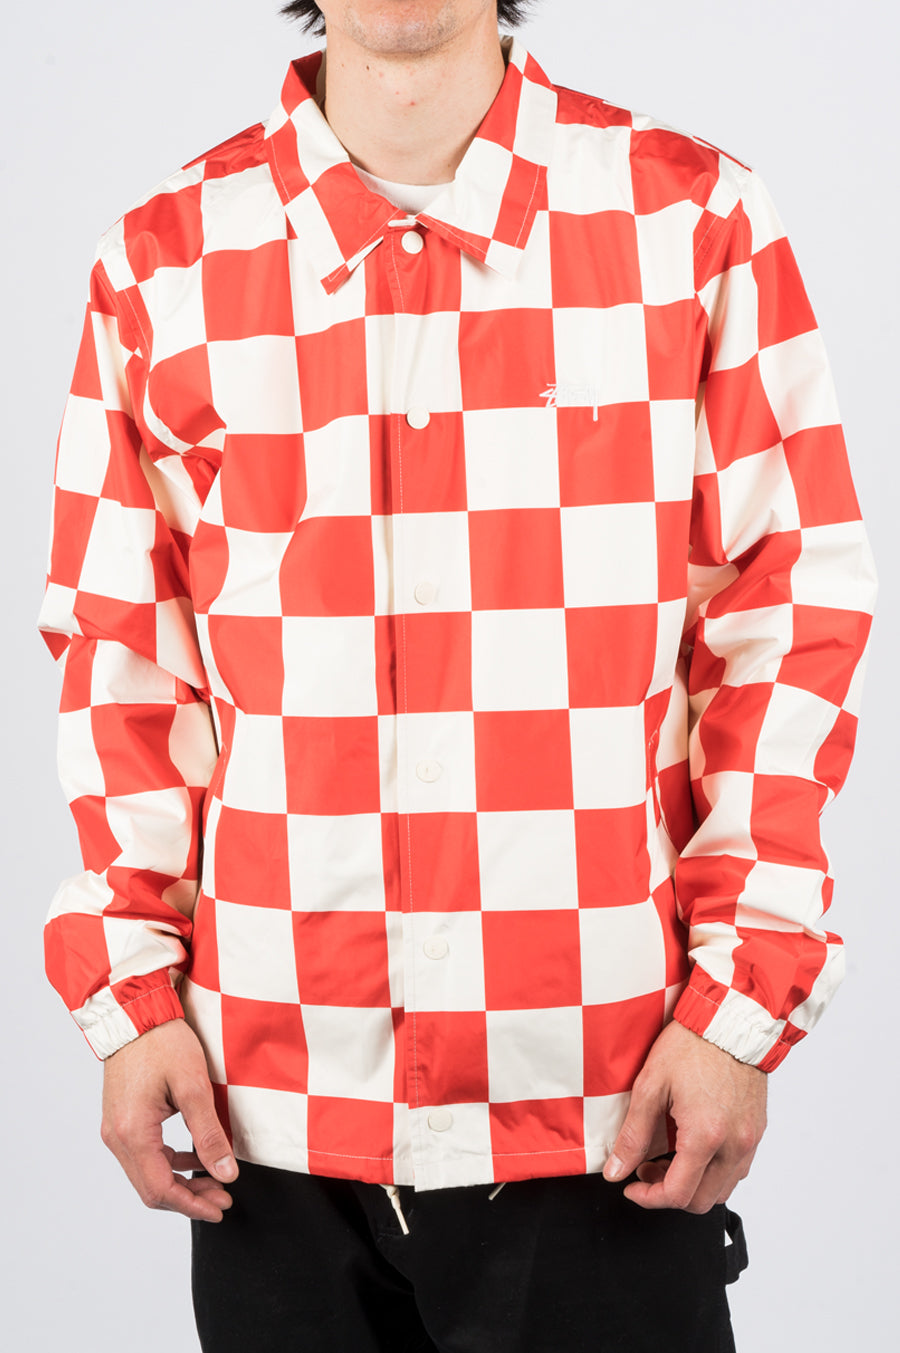 STUSSY COACH JACKET CHECKERBOARD RED - BLENDS